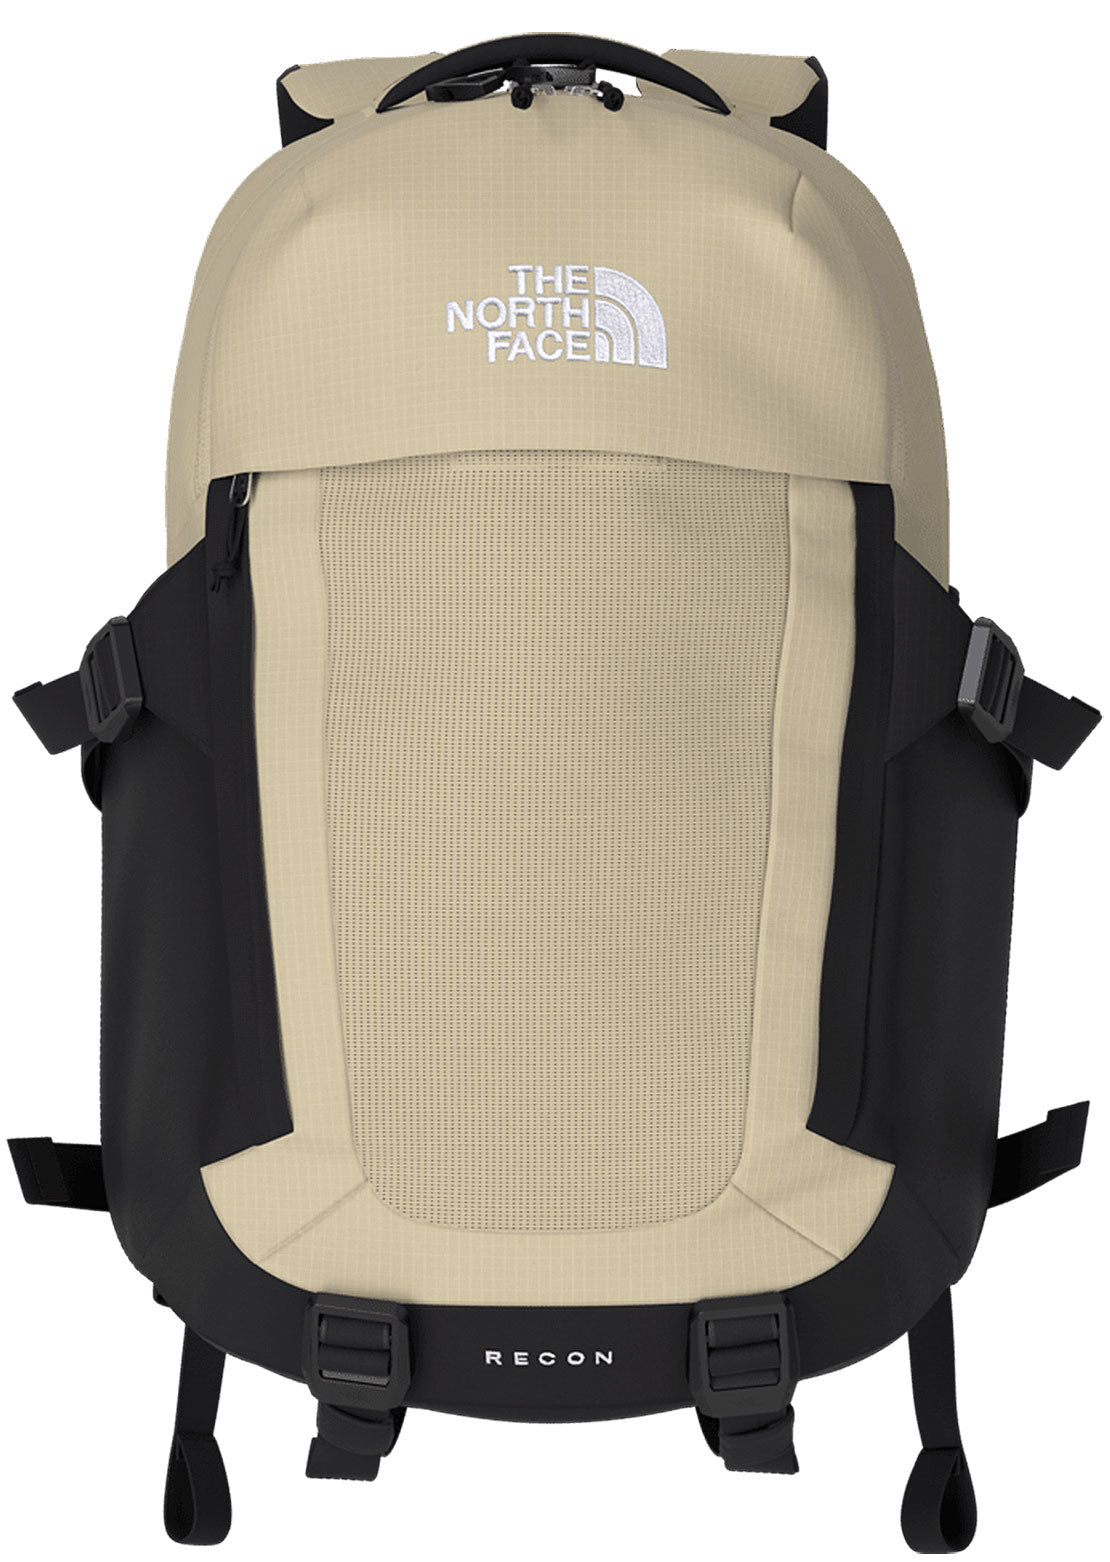  The North Face Recon Backpack Gravel/TNF Black